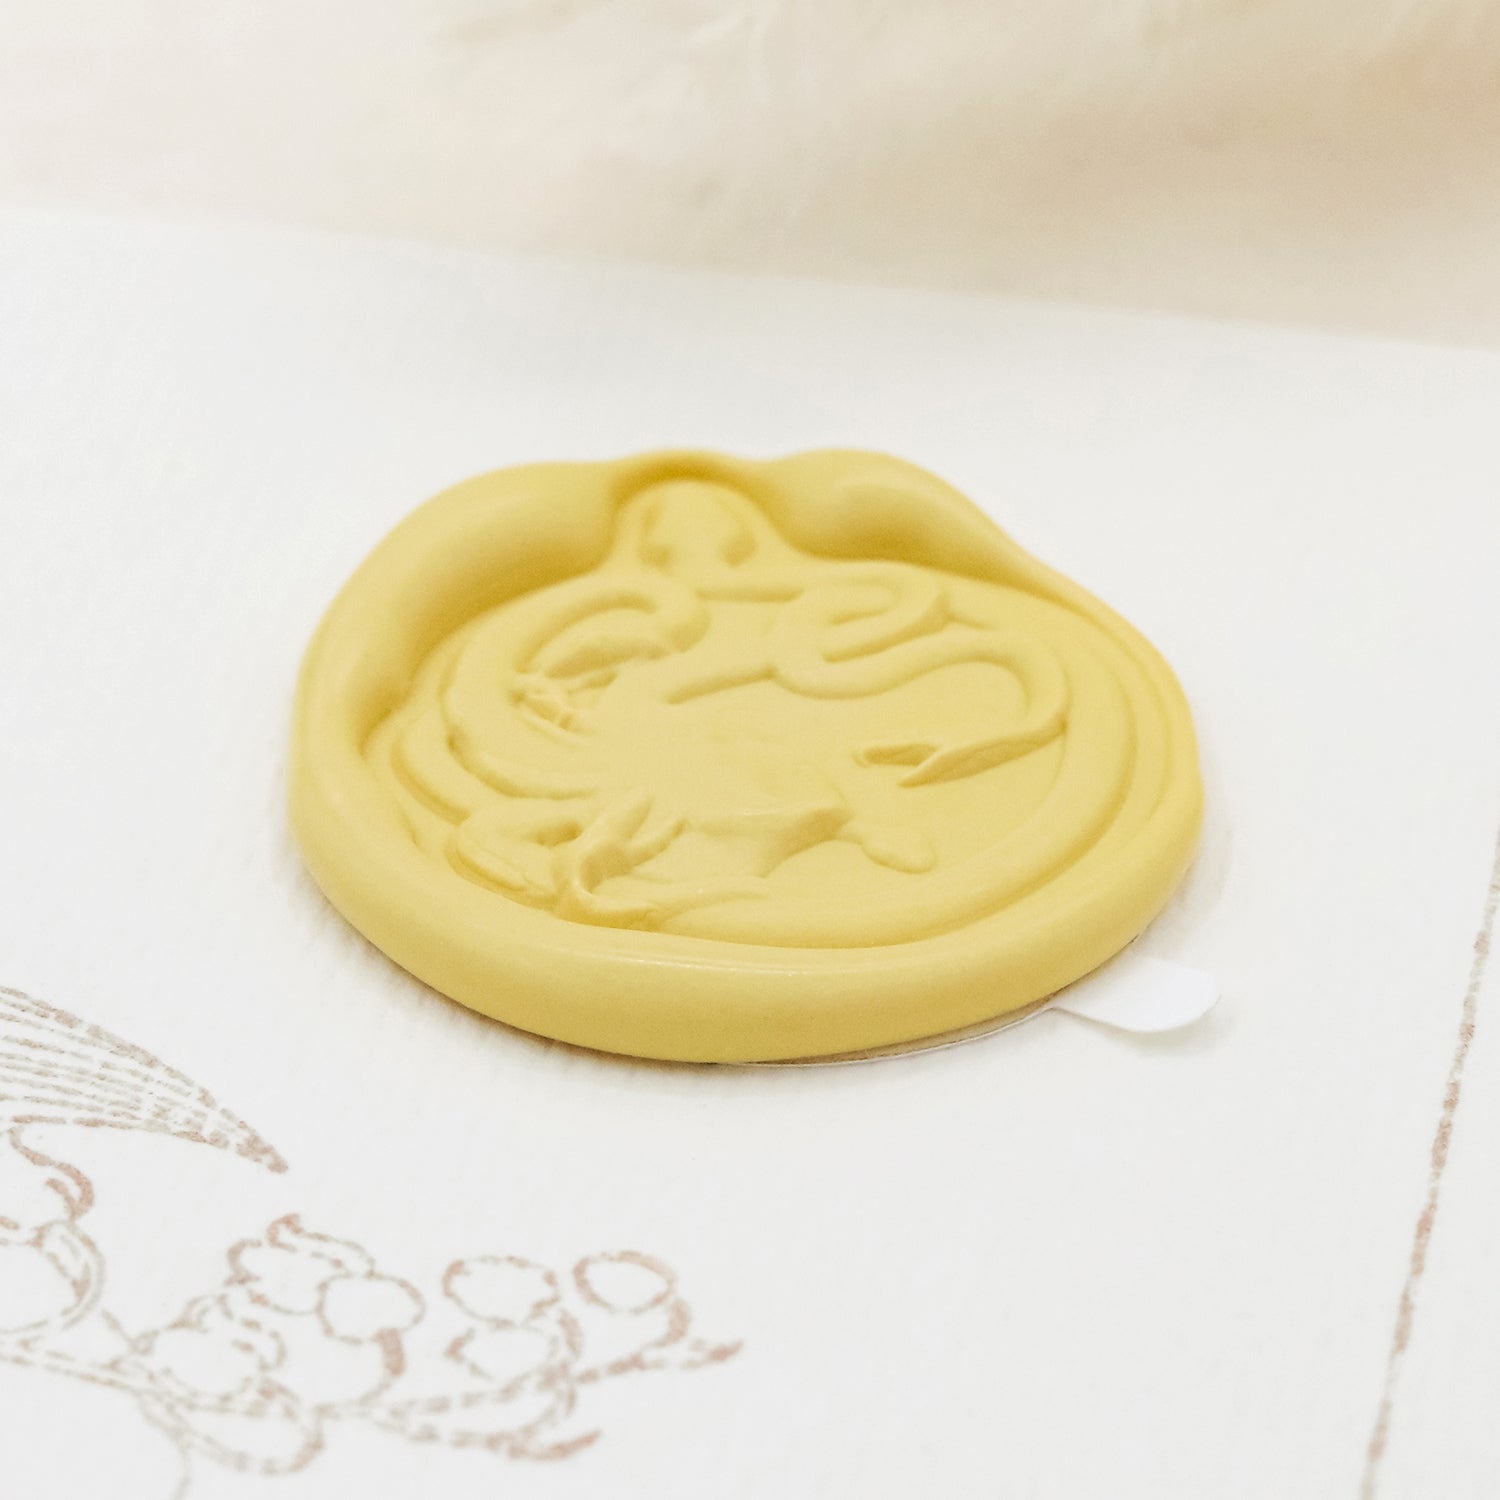 Stamprints 3D Relief Medusa Self-adhesive Wax Seal Stickers 4